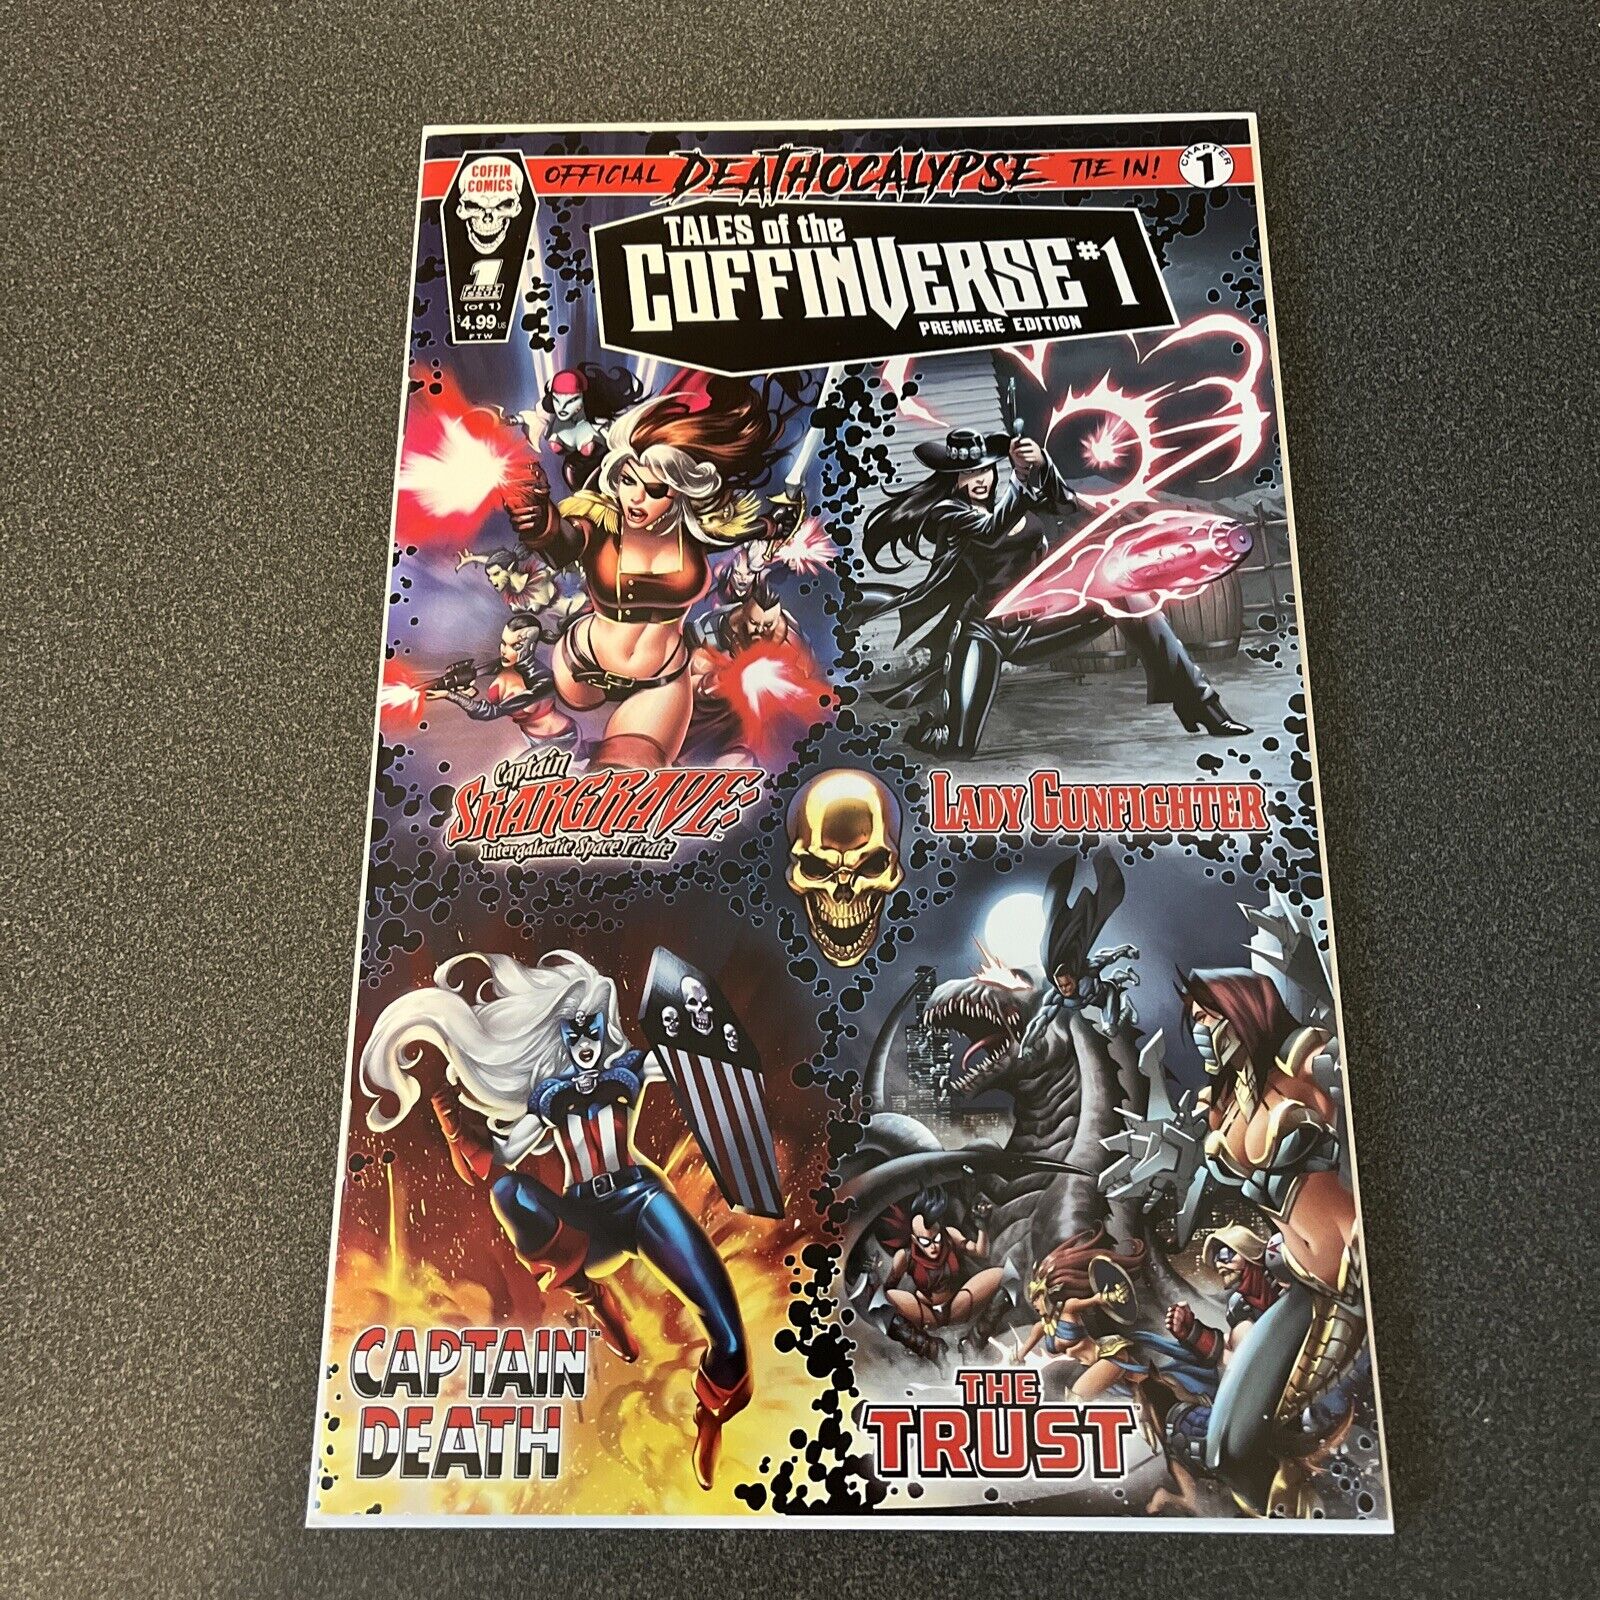 Coffin Comics TALES OF THE COFFINVERSE #1 Premiere Edition First Printing 2021